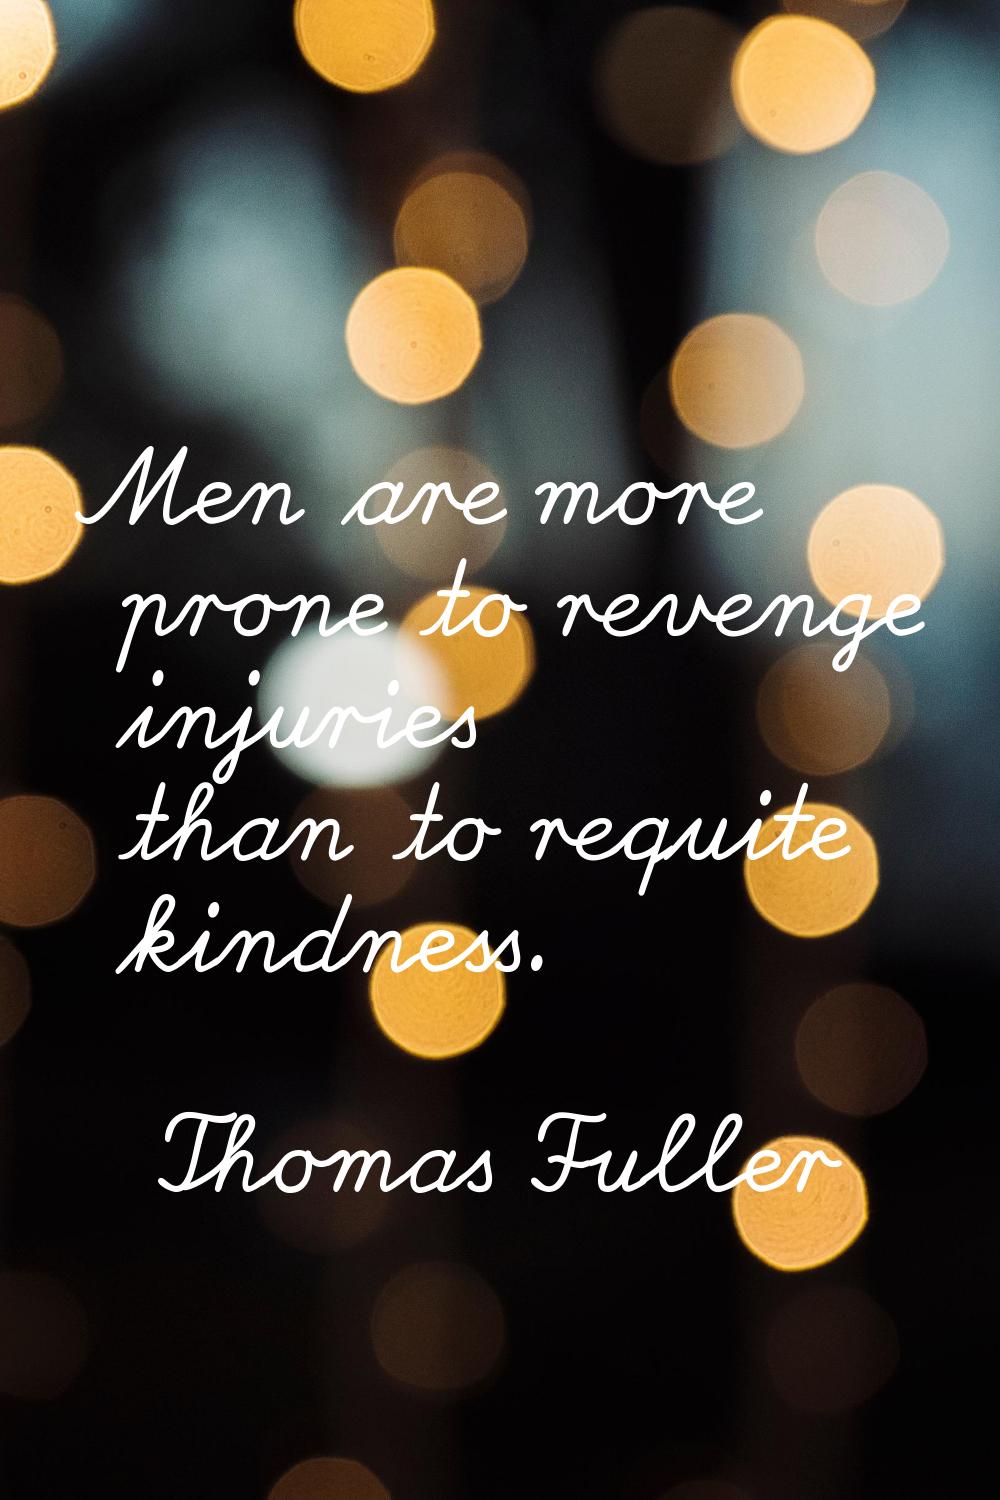 Men are more prone to revenge injuries than to requite kindness.